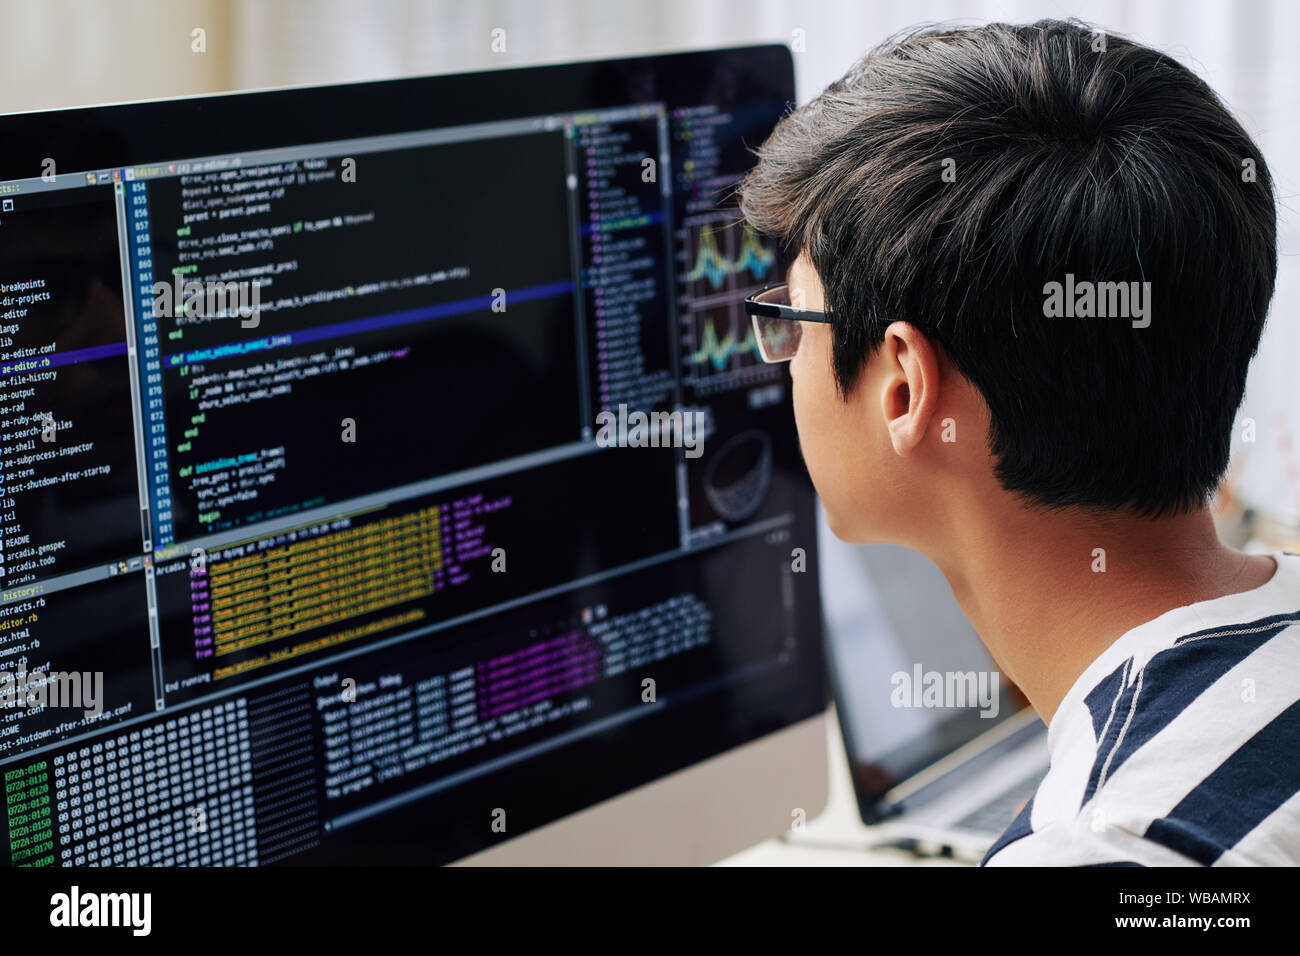 Smart Teenage Boy In Glasses Checking Programming Code On Computer